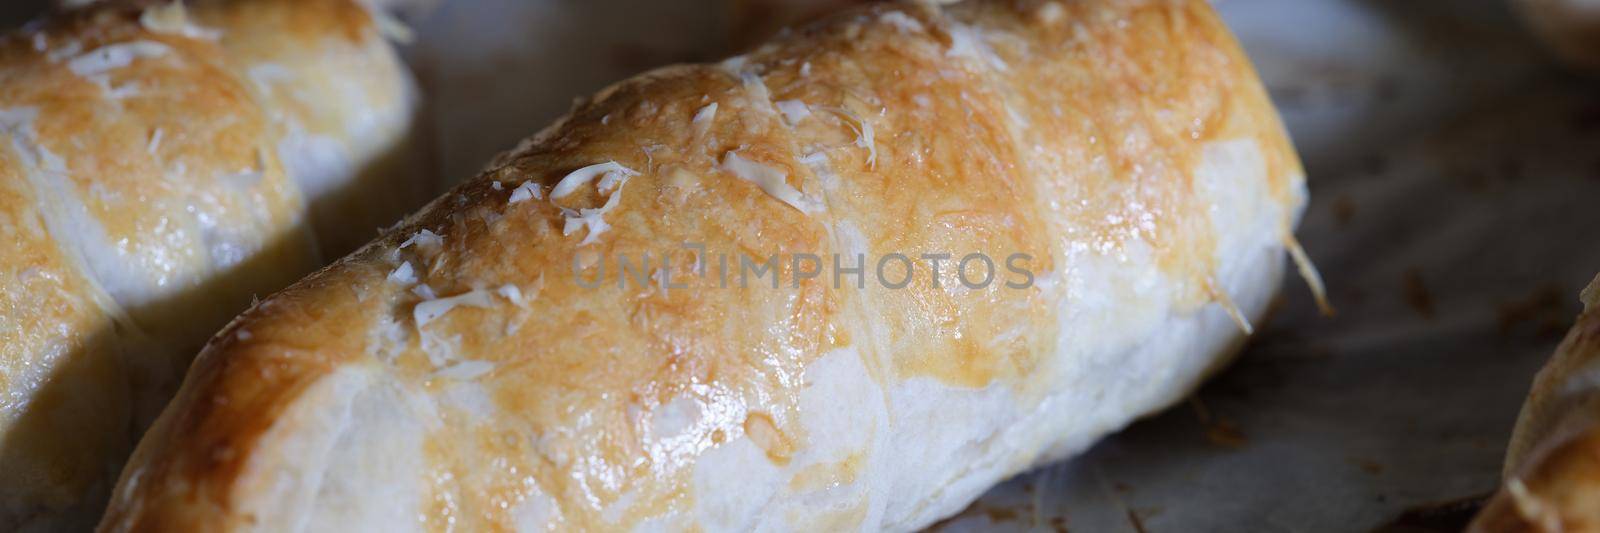 Closeup of delicious appetizing homemade buns on baking sheet. Home cooking concept